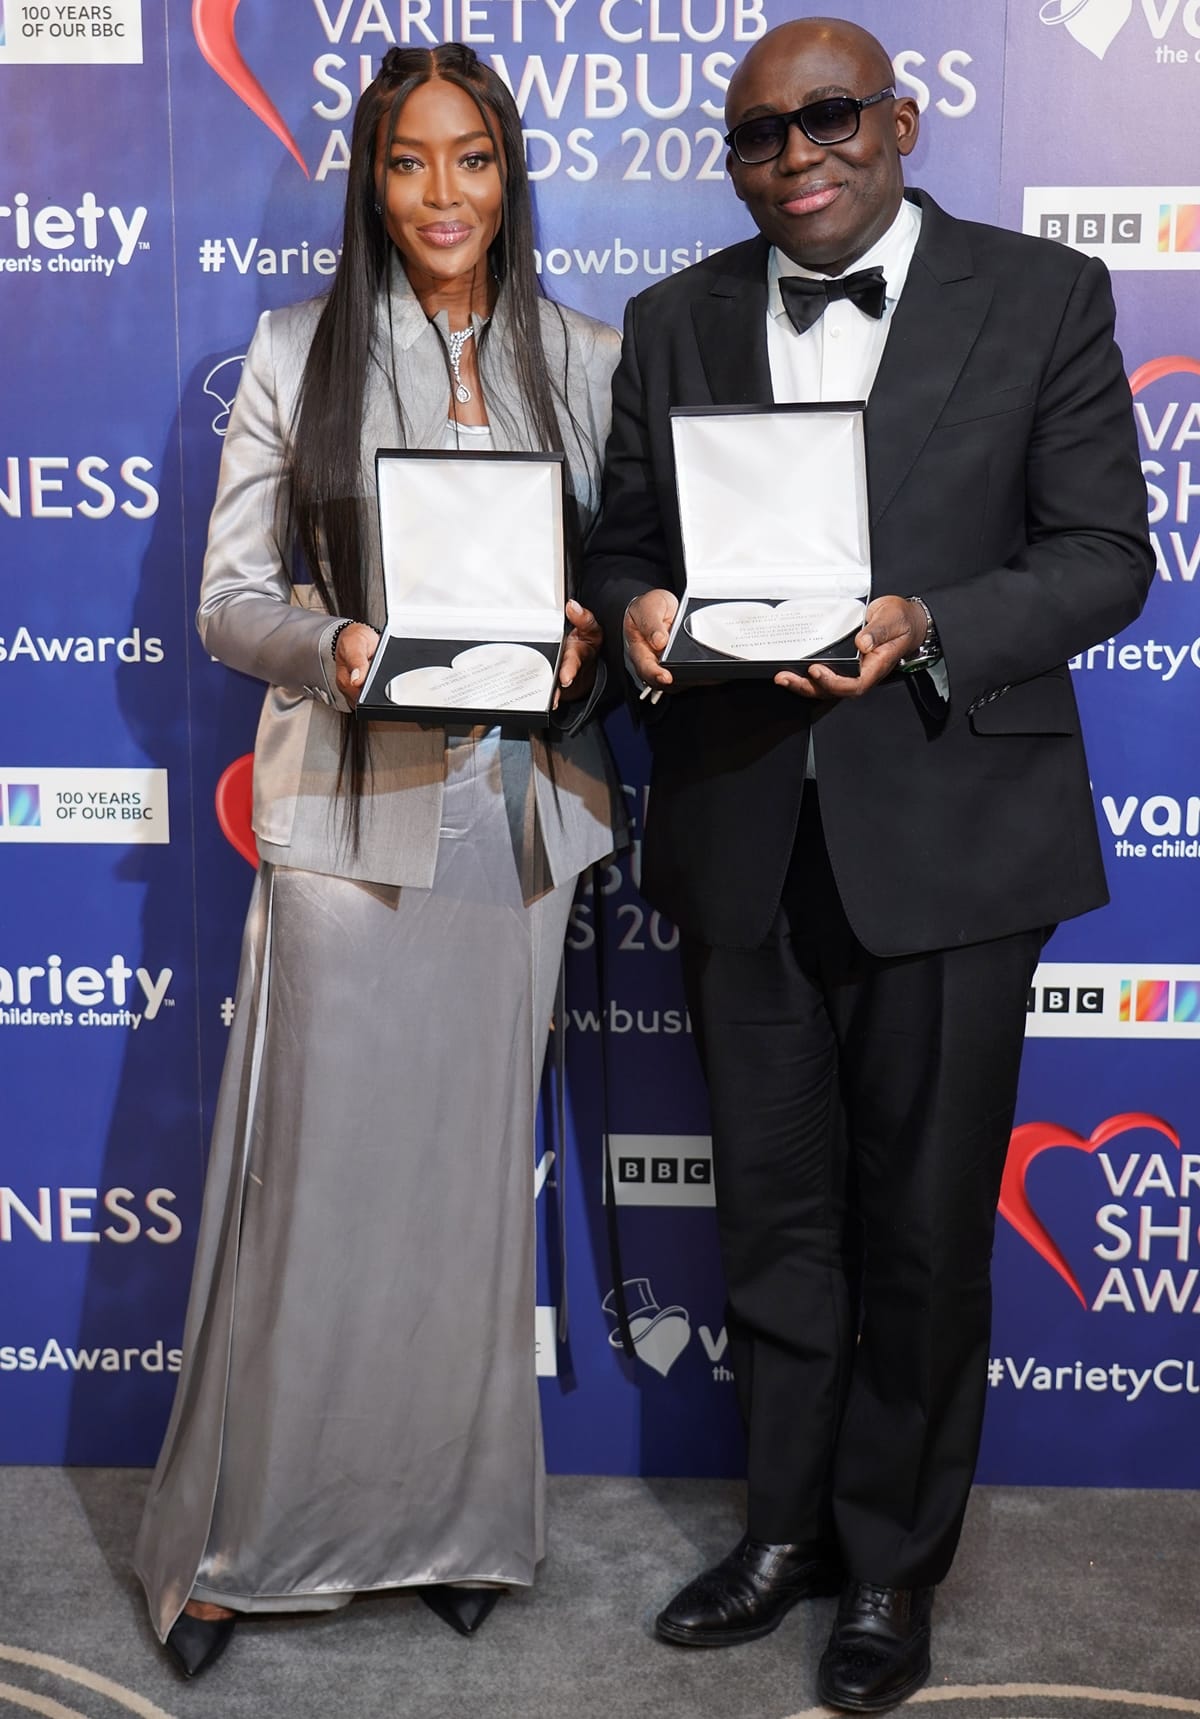 Naomi Campbell and Edward Enninful were both honored at the Variety Club Showbusiness Awards 2022